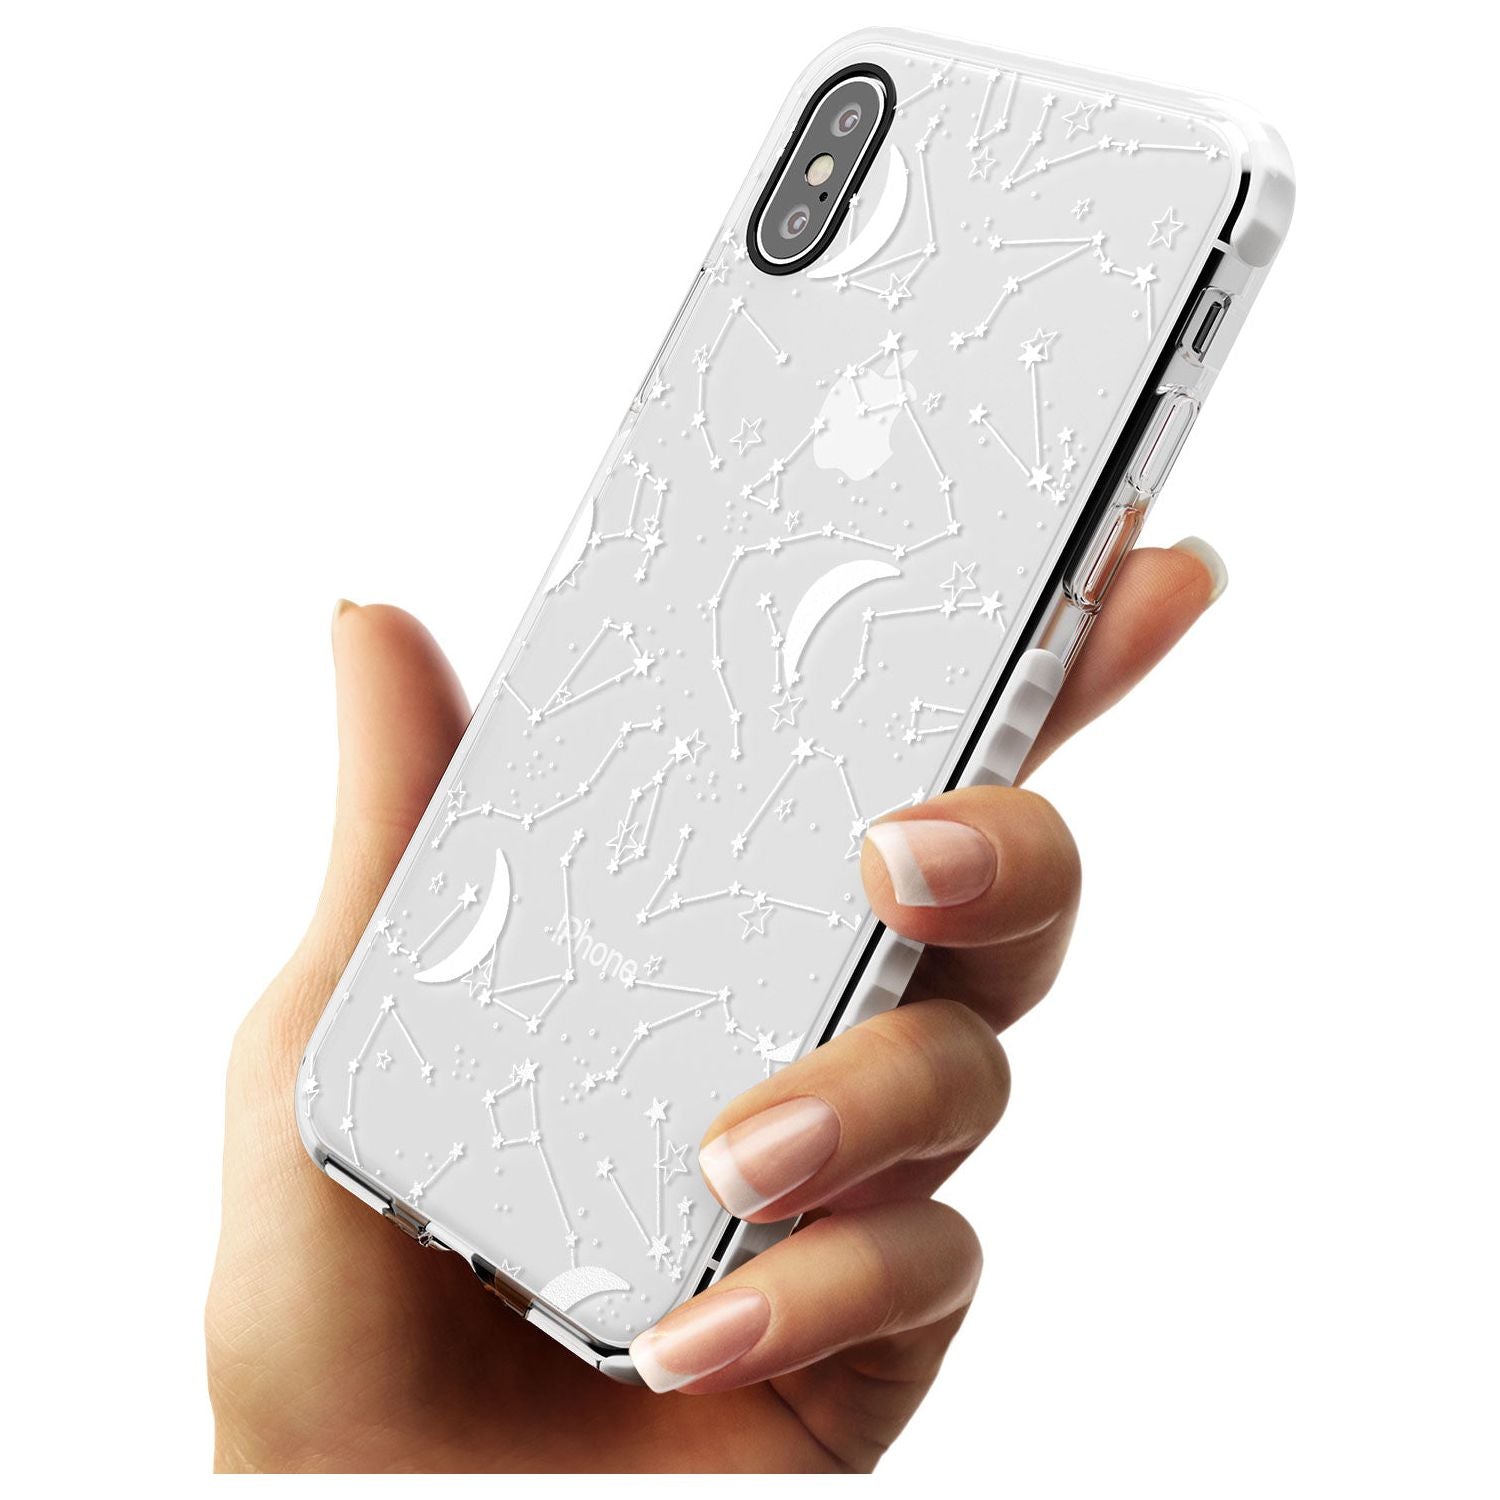 White Constellations on Clear Slim TPU Phone Case Warehouse X XS Max XR